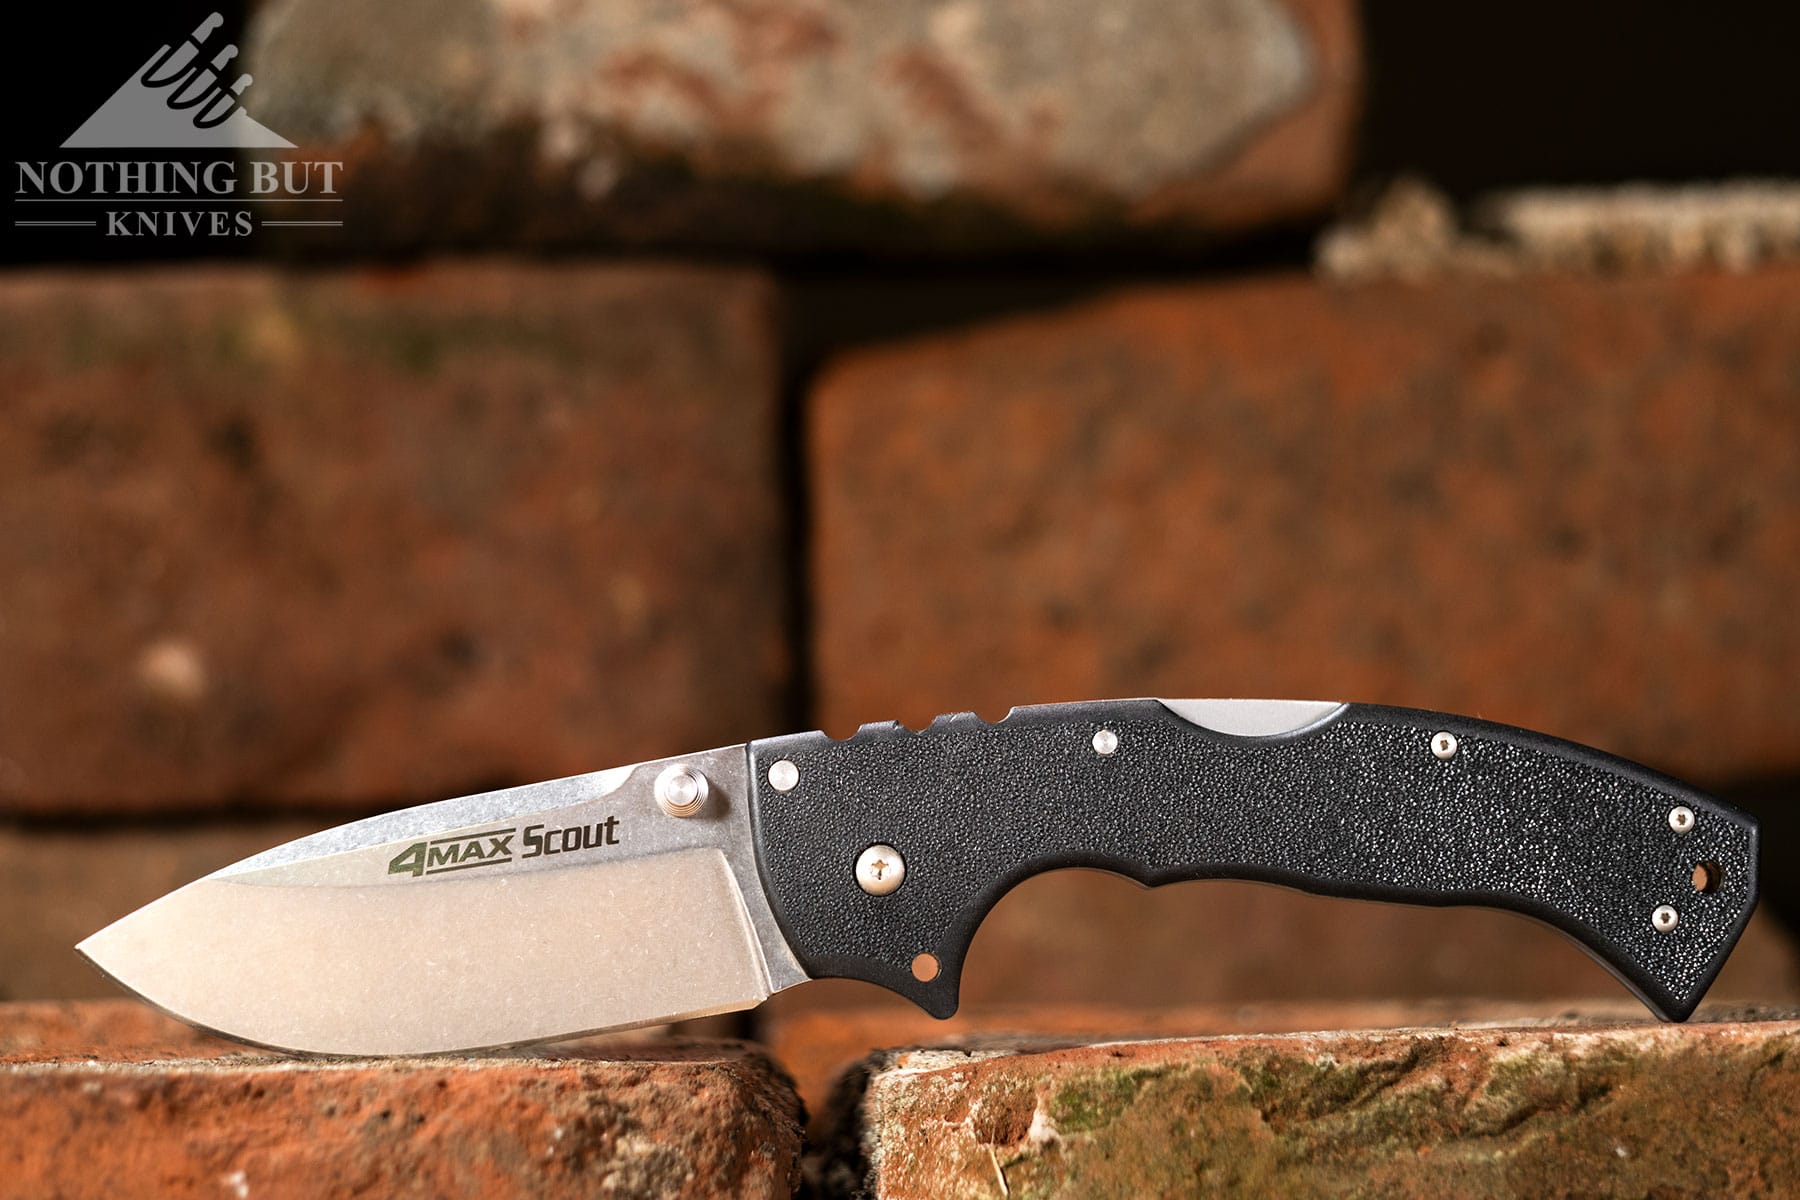 A big folding knife in the open position on a brick in front of a brick background.